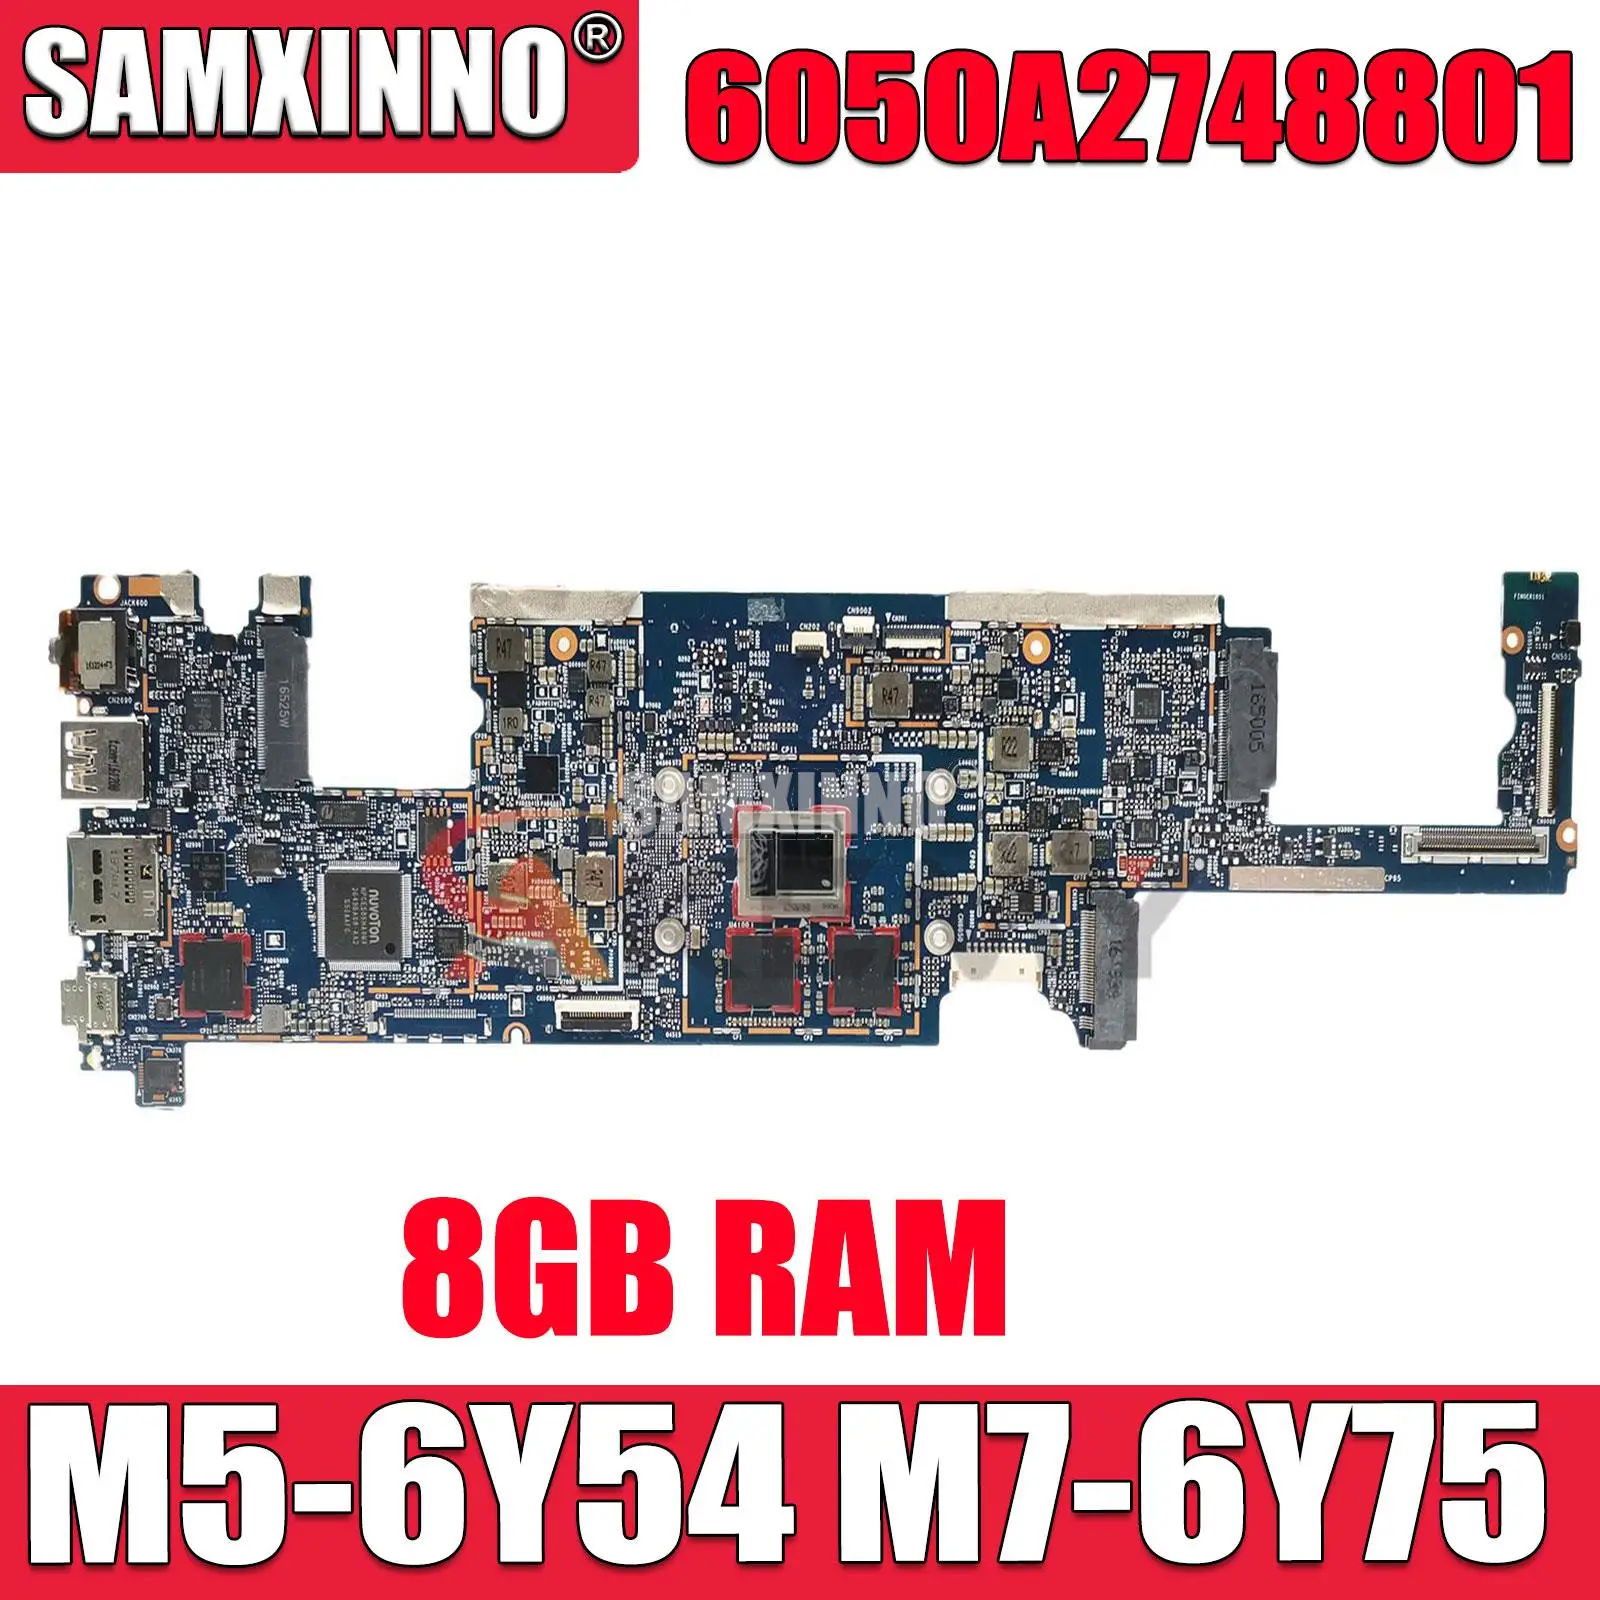 

6050A2748801 For HP Elite x2 1012 G1 Laptop motherboard M5-6Y54 M7-6Y75 CPU 8GB RMB Mainboard 845470-601 844858-601